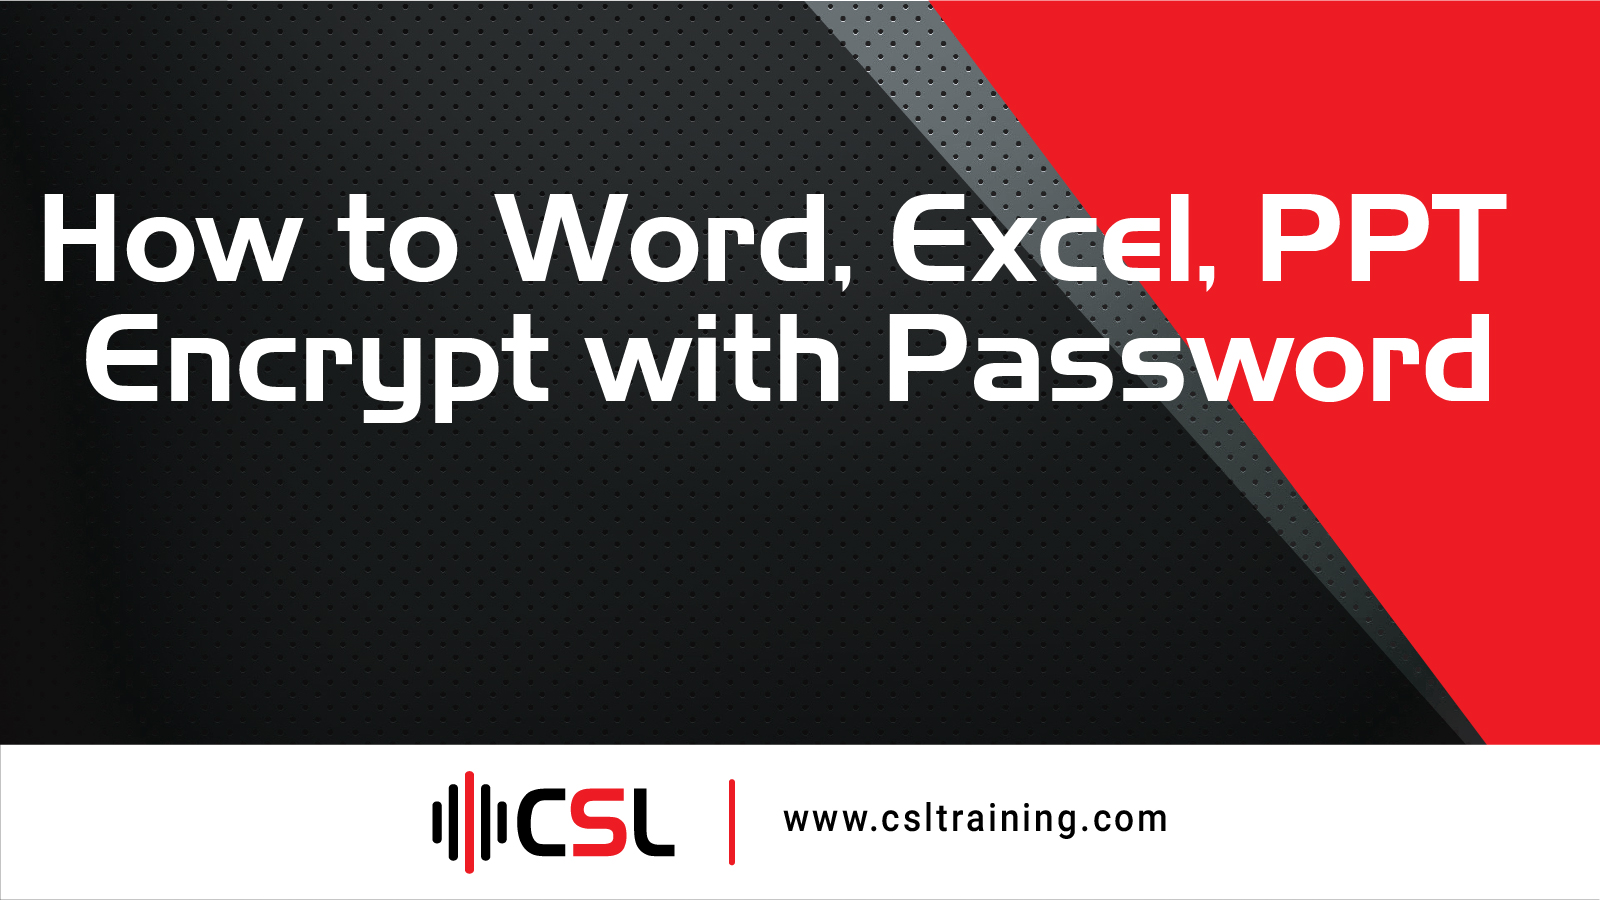 You are currently viewing How to Word, Excel, PPT Encrypt with Password